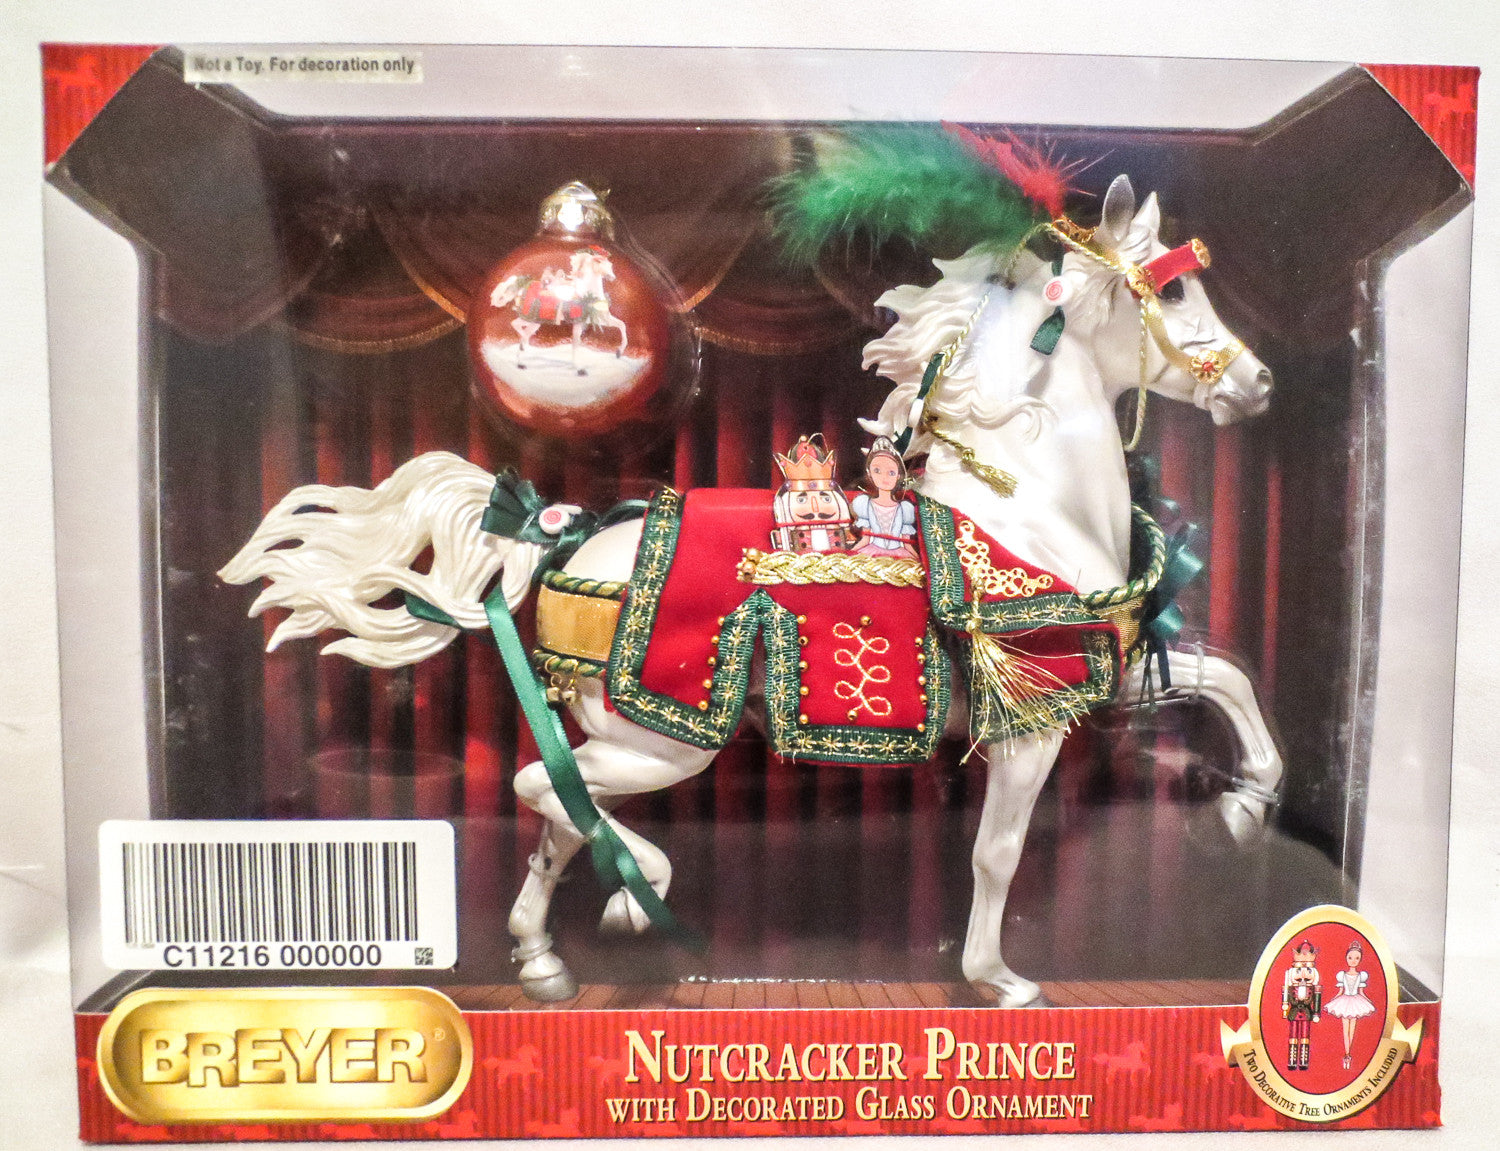 Breyer Christmas and other HolidayThemed Items tagged "Show Only